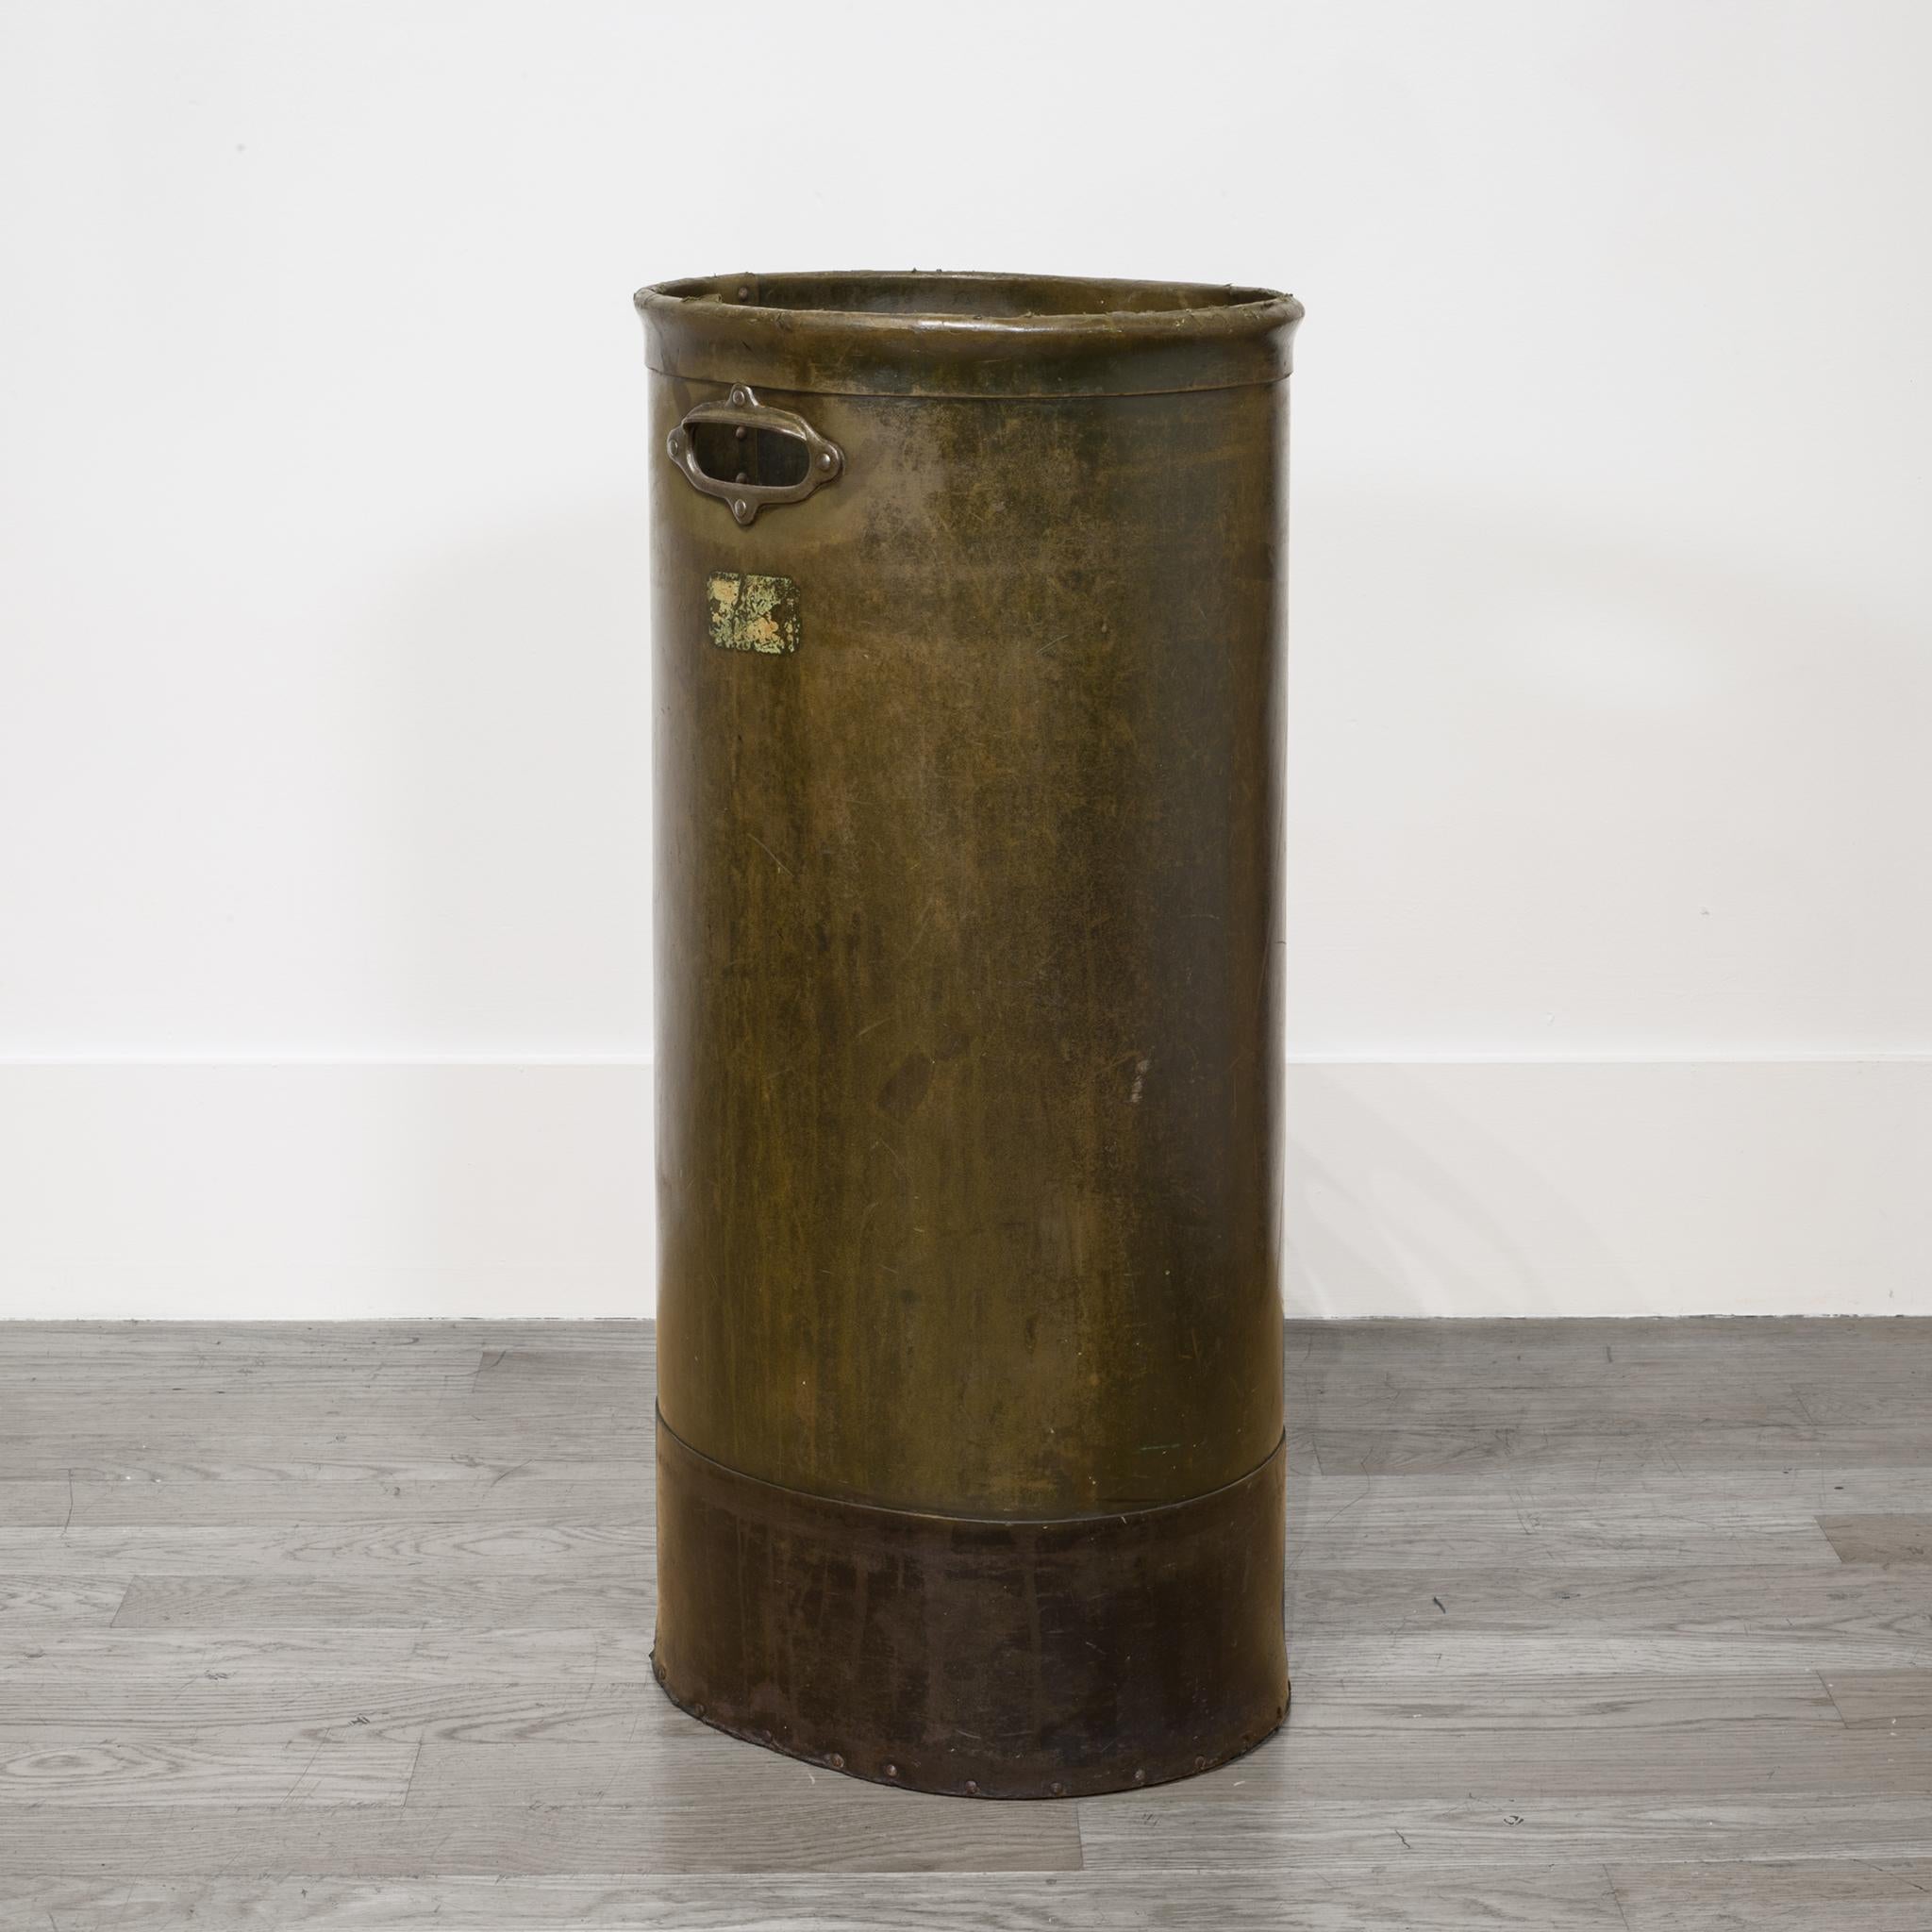 This is an original industrial vulcanized fiber tall waste basket with riveted sides, steel rimmed cutout handles and a rare wooden bottom. There is an original label on one side. This piece has retained its original finish and has the appropriate